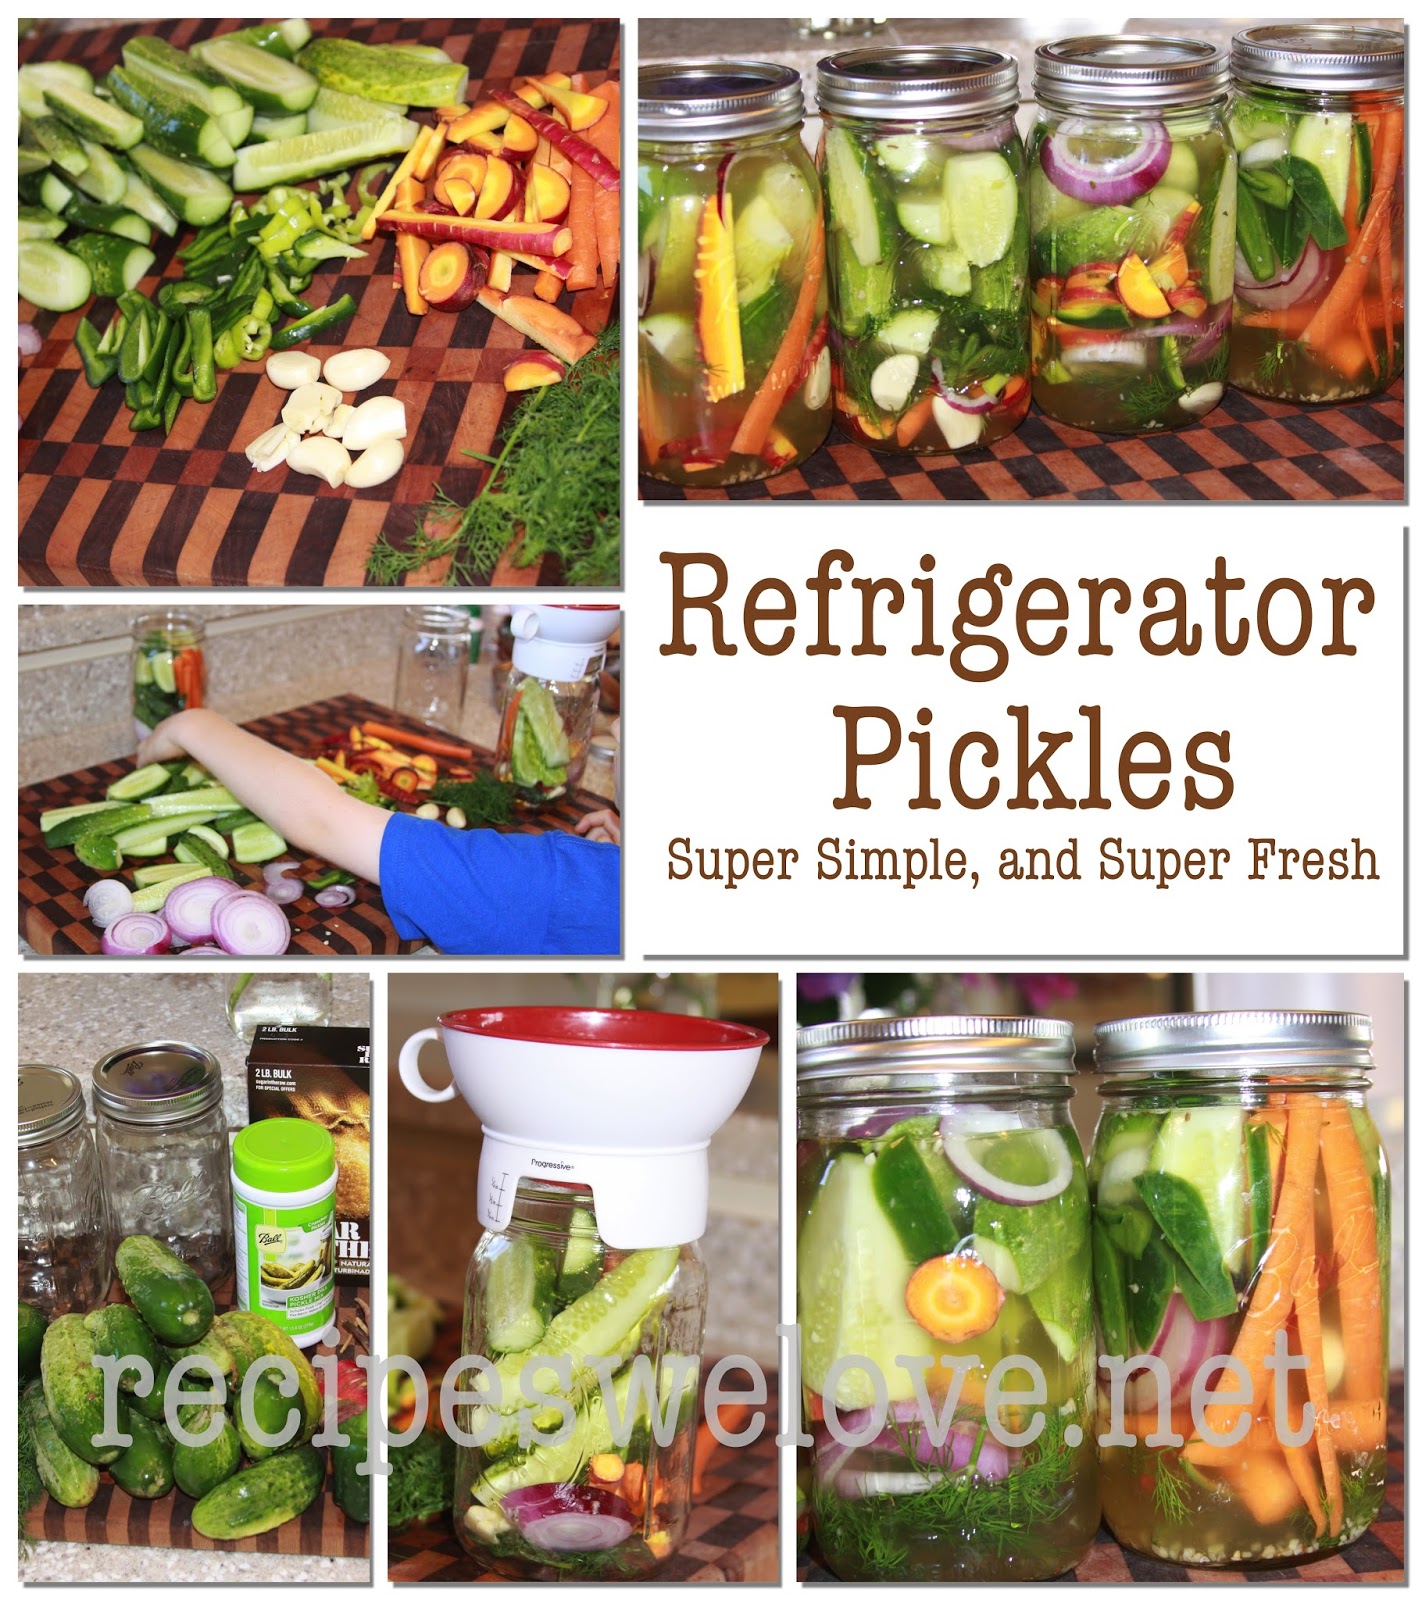 Recipes We Love: Refrigerator Pickles ...no canning involved